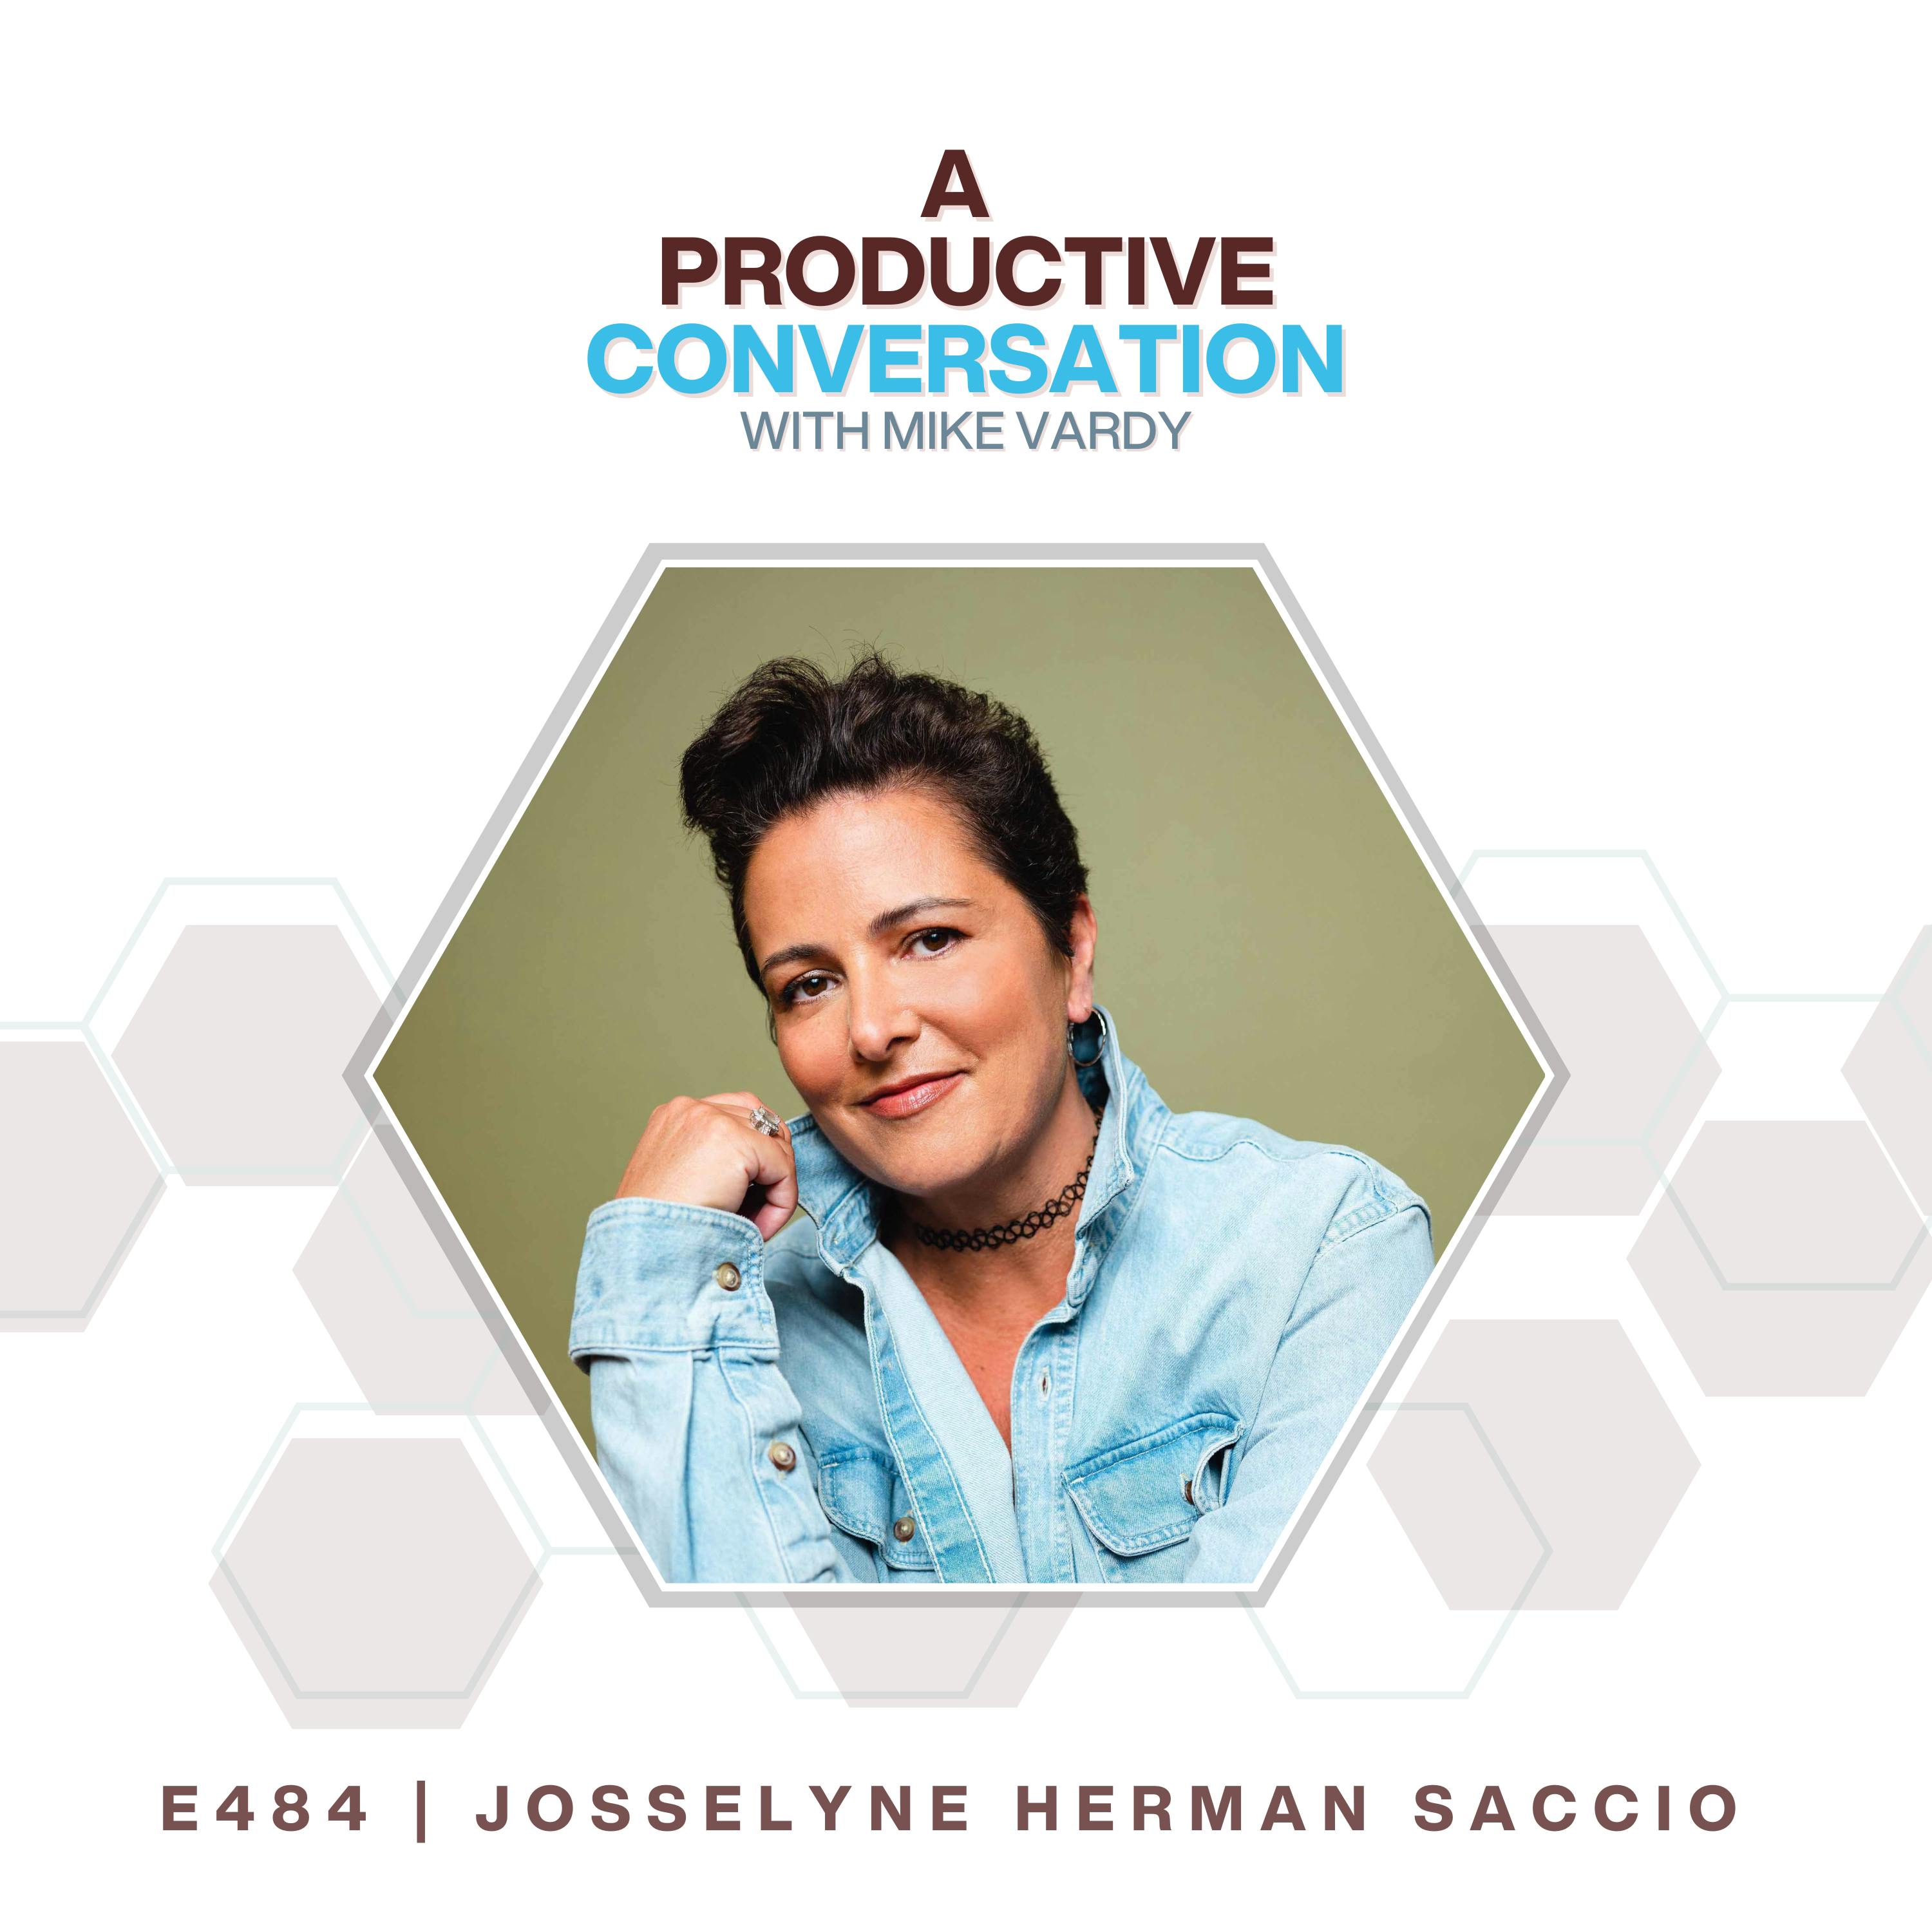 Josselyne Herman Saccio Talks About The Art of Being Unmissable With